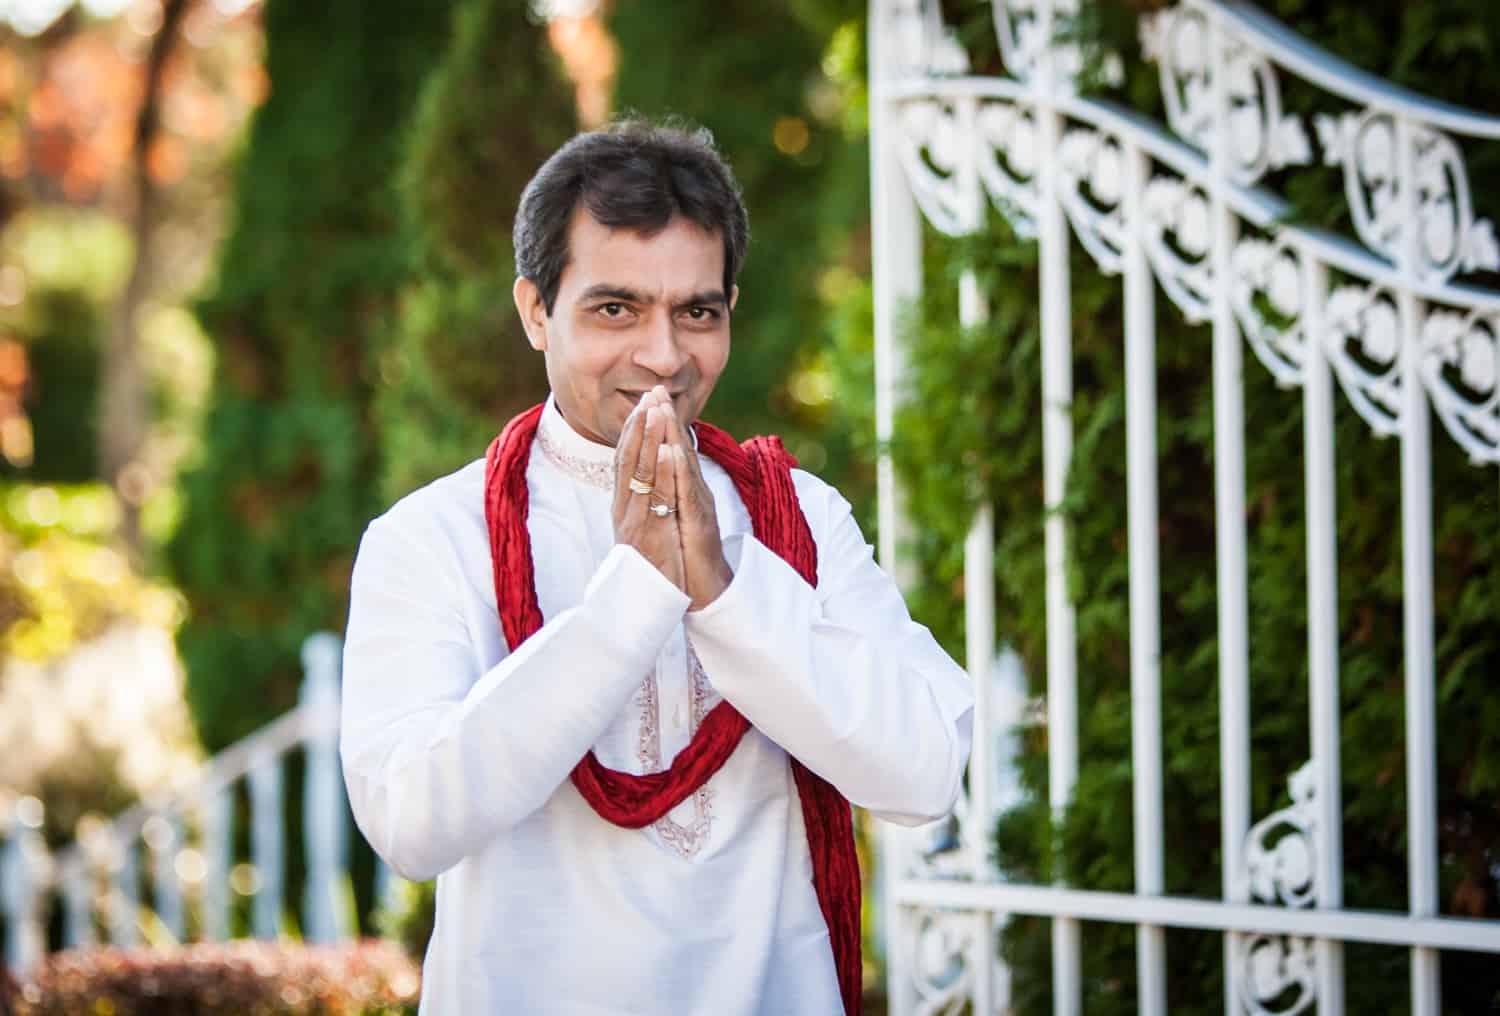 Man with praying hands and traditional Indian attire in front of gate